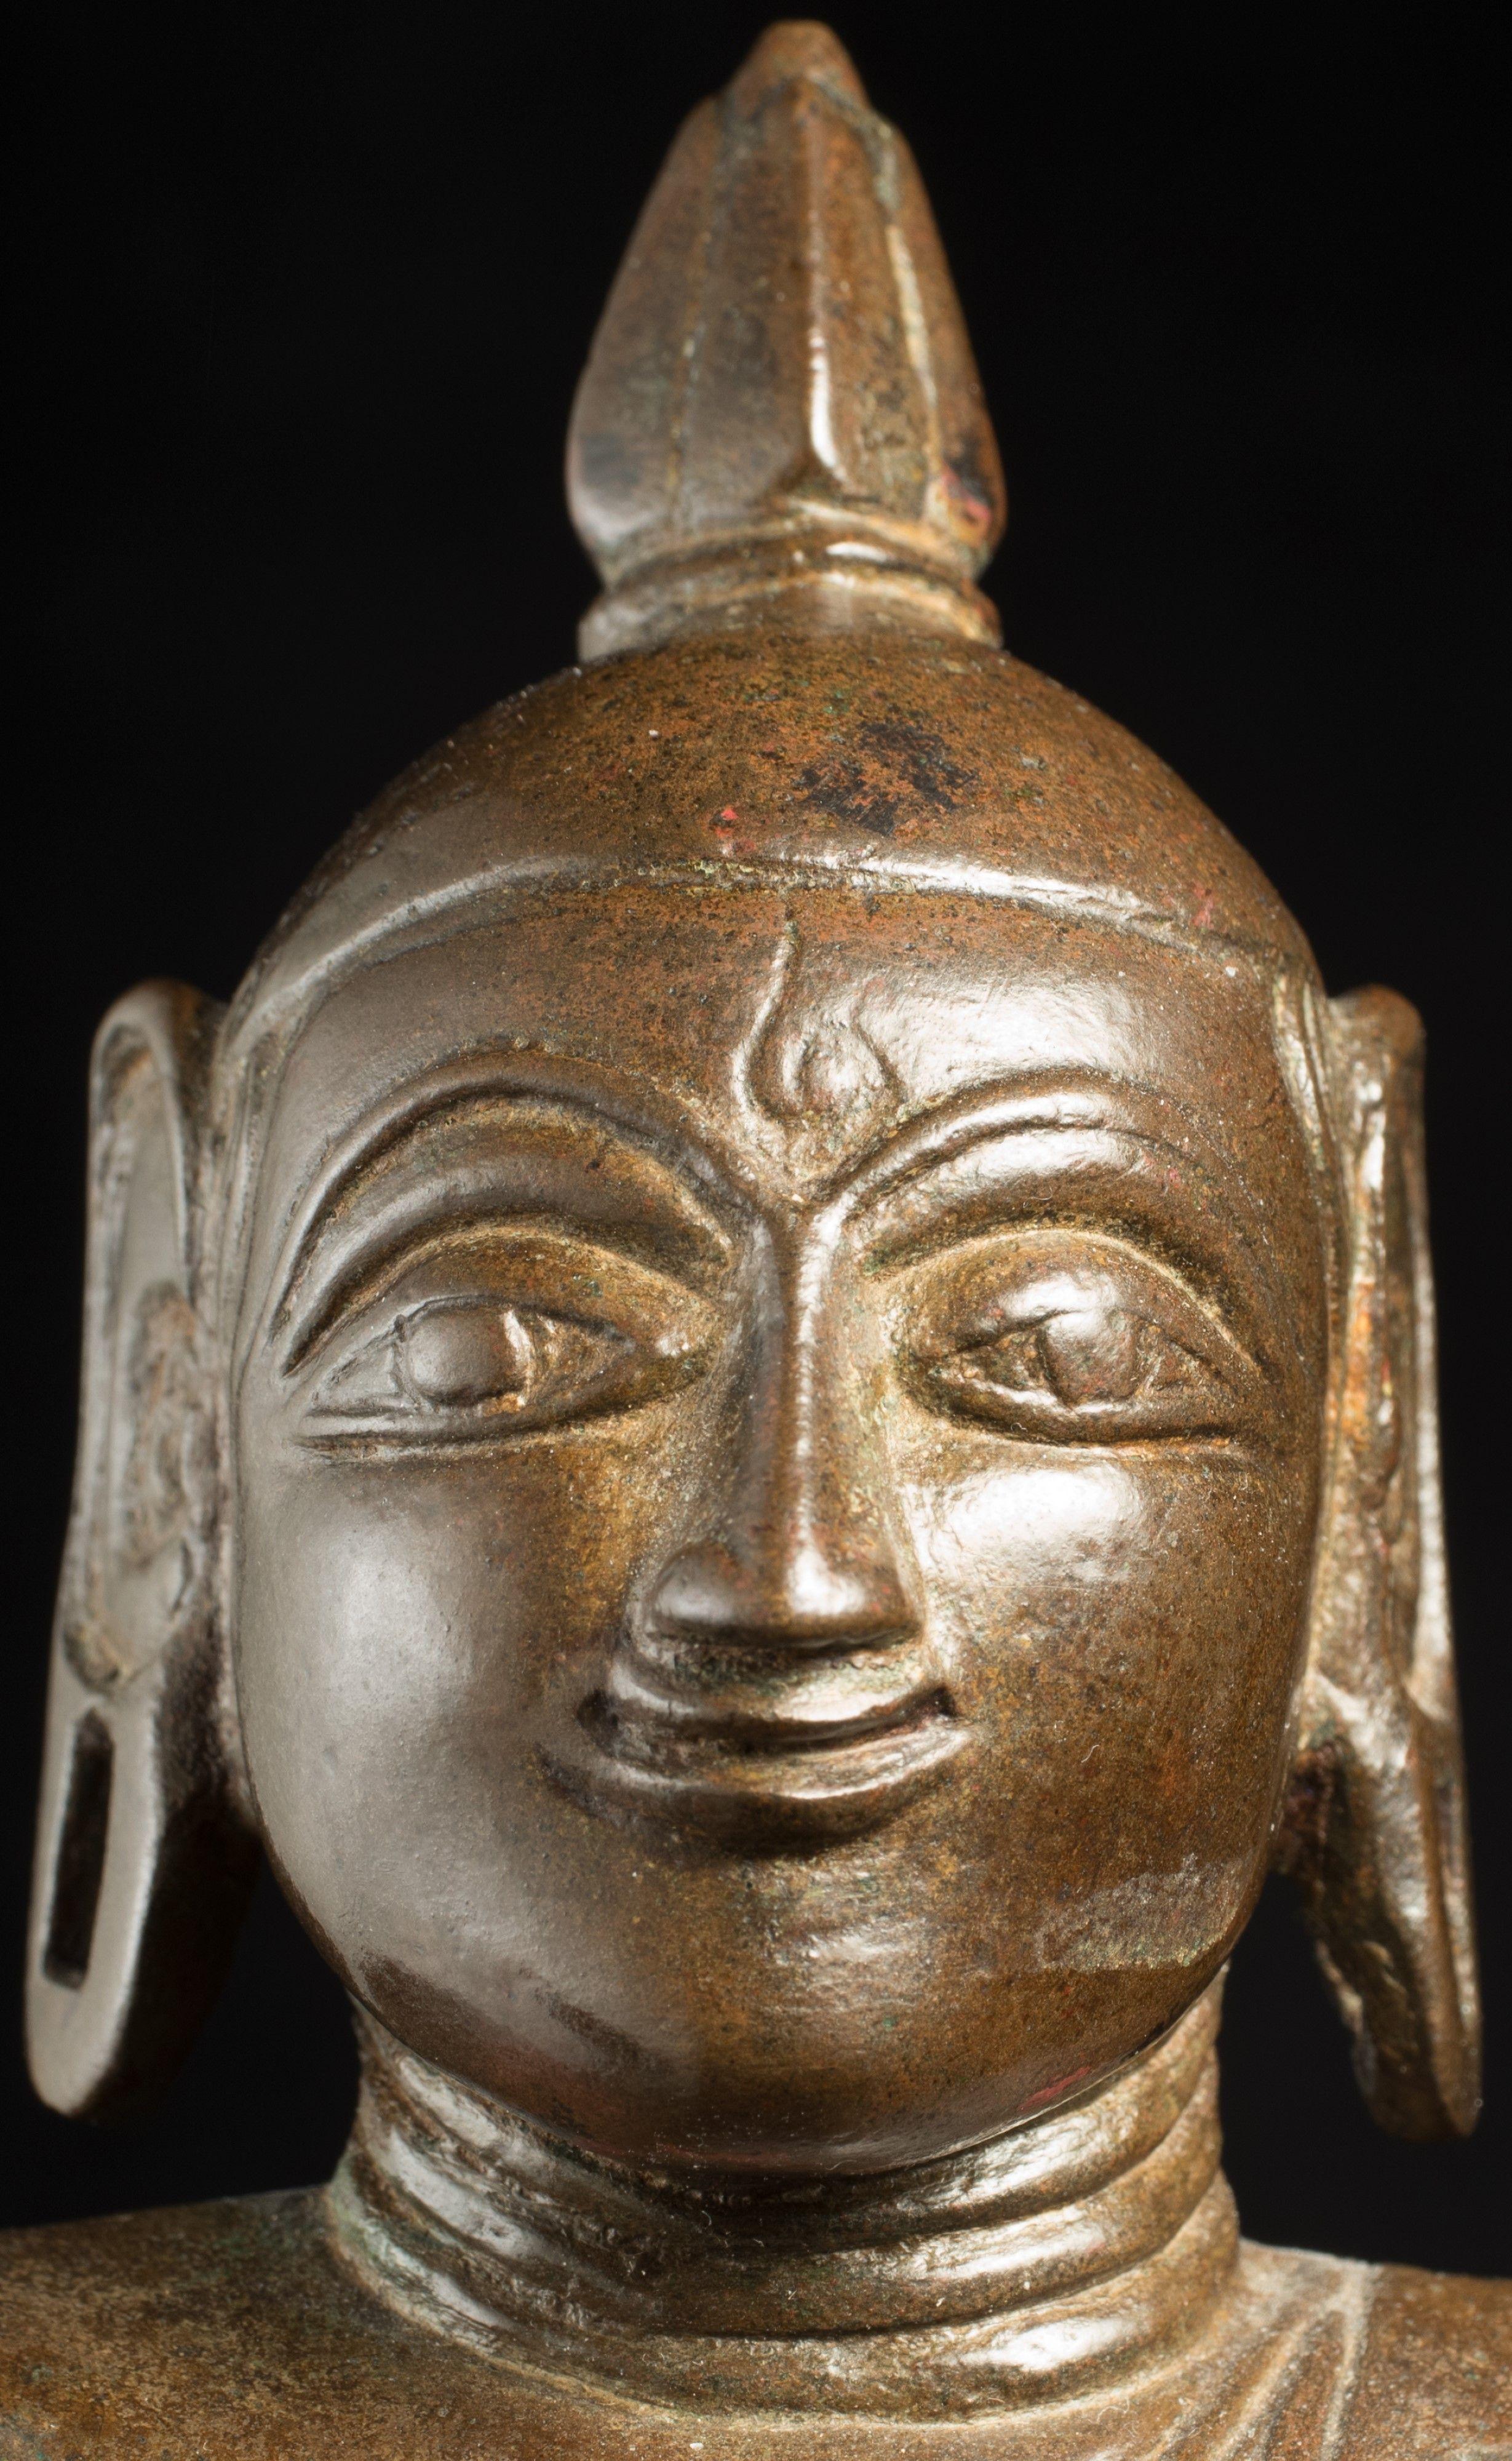 A Very Large and Rare 14-16thC Nagapattinam Bronze Buddha, 8000 In Good Condition For Sale In Ukiah, CA